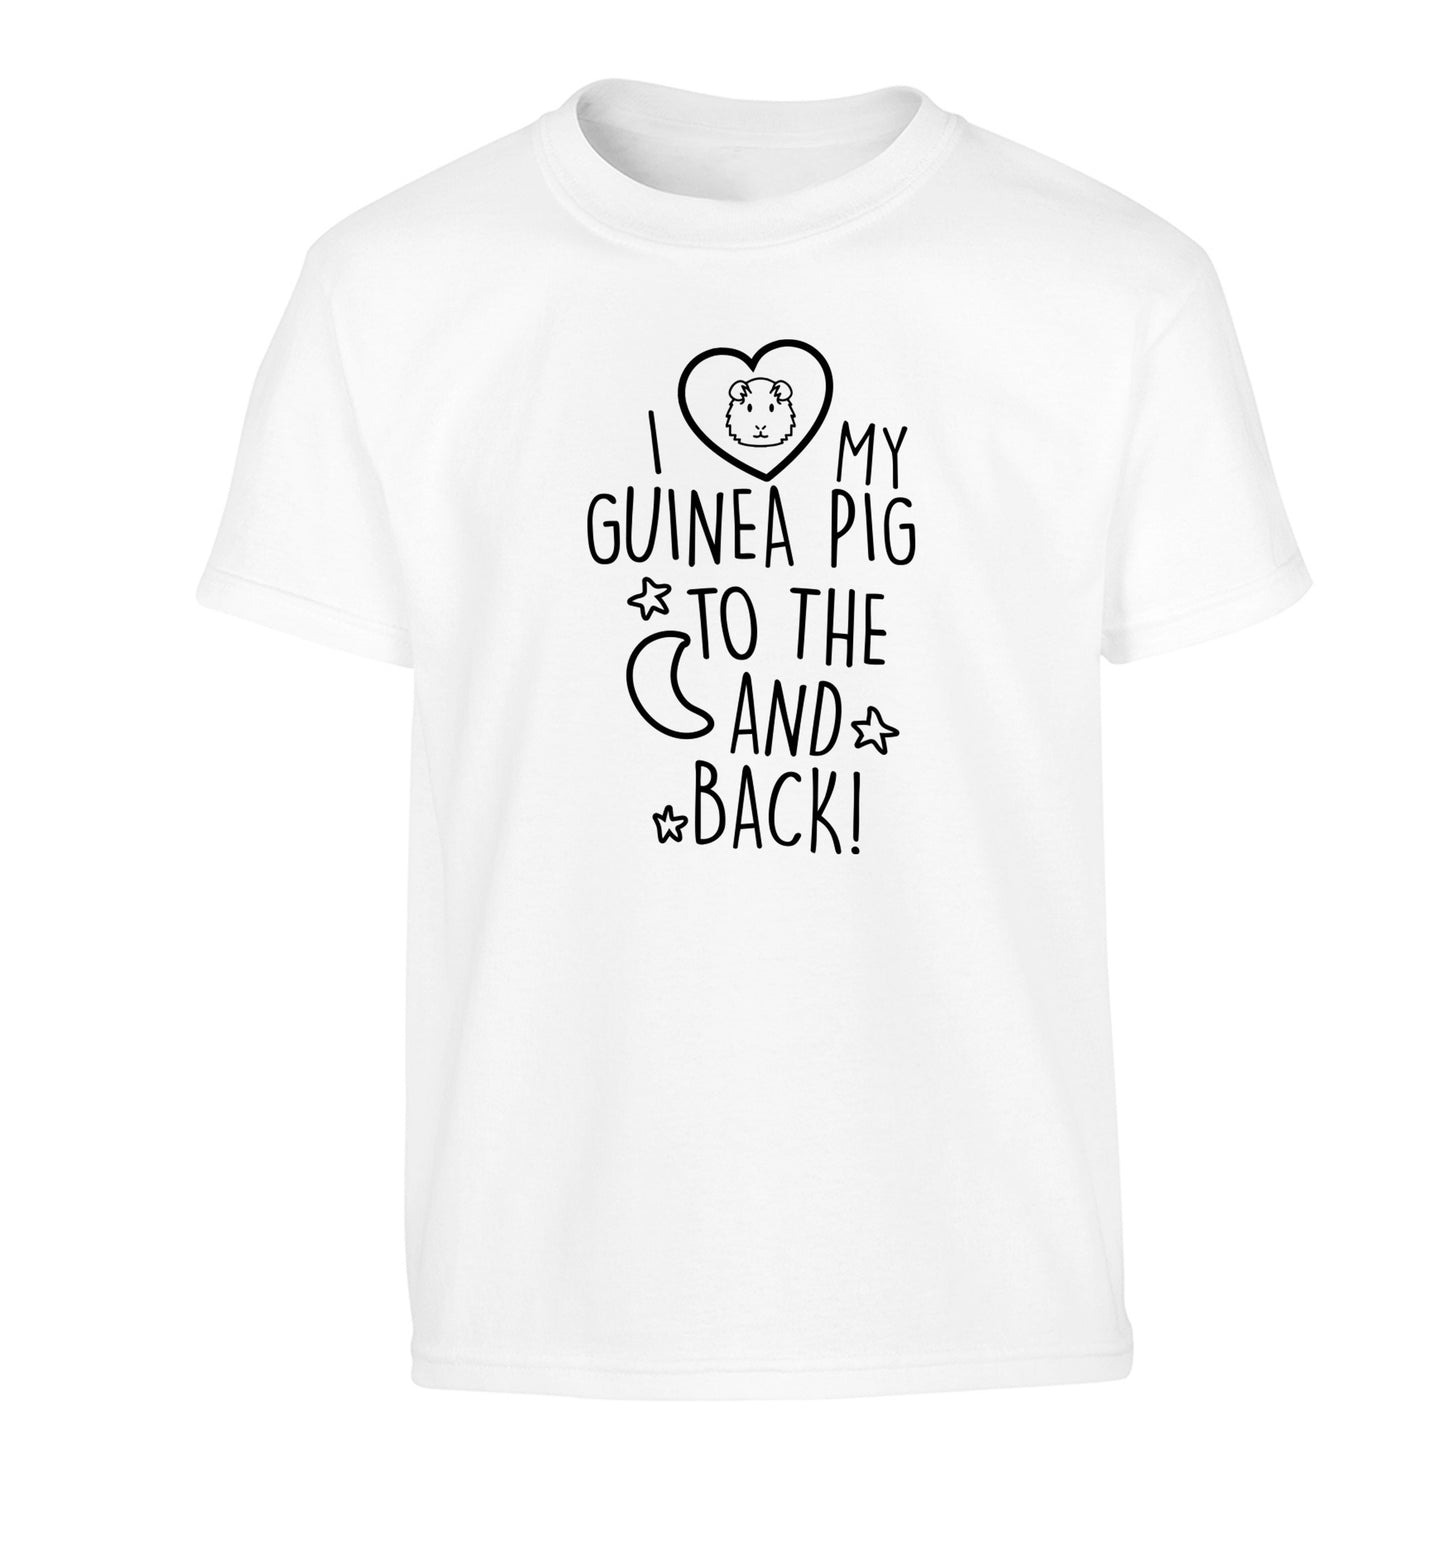 I love my guinea pig to the moon and back Children's white Tshirt 12-14 Years